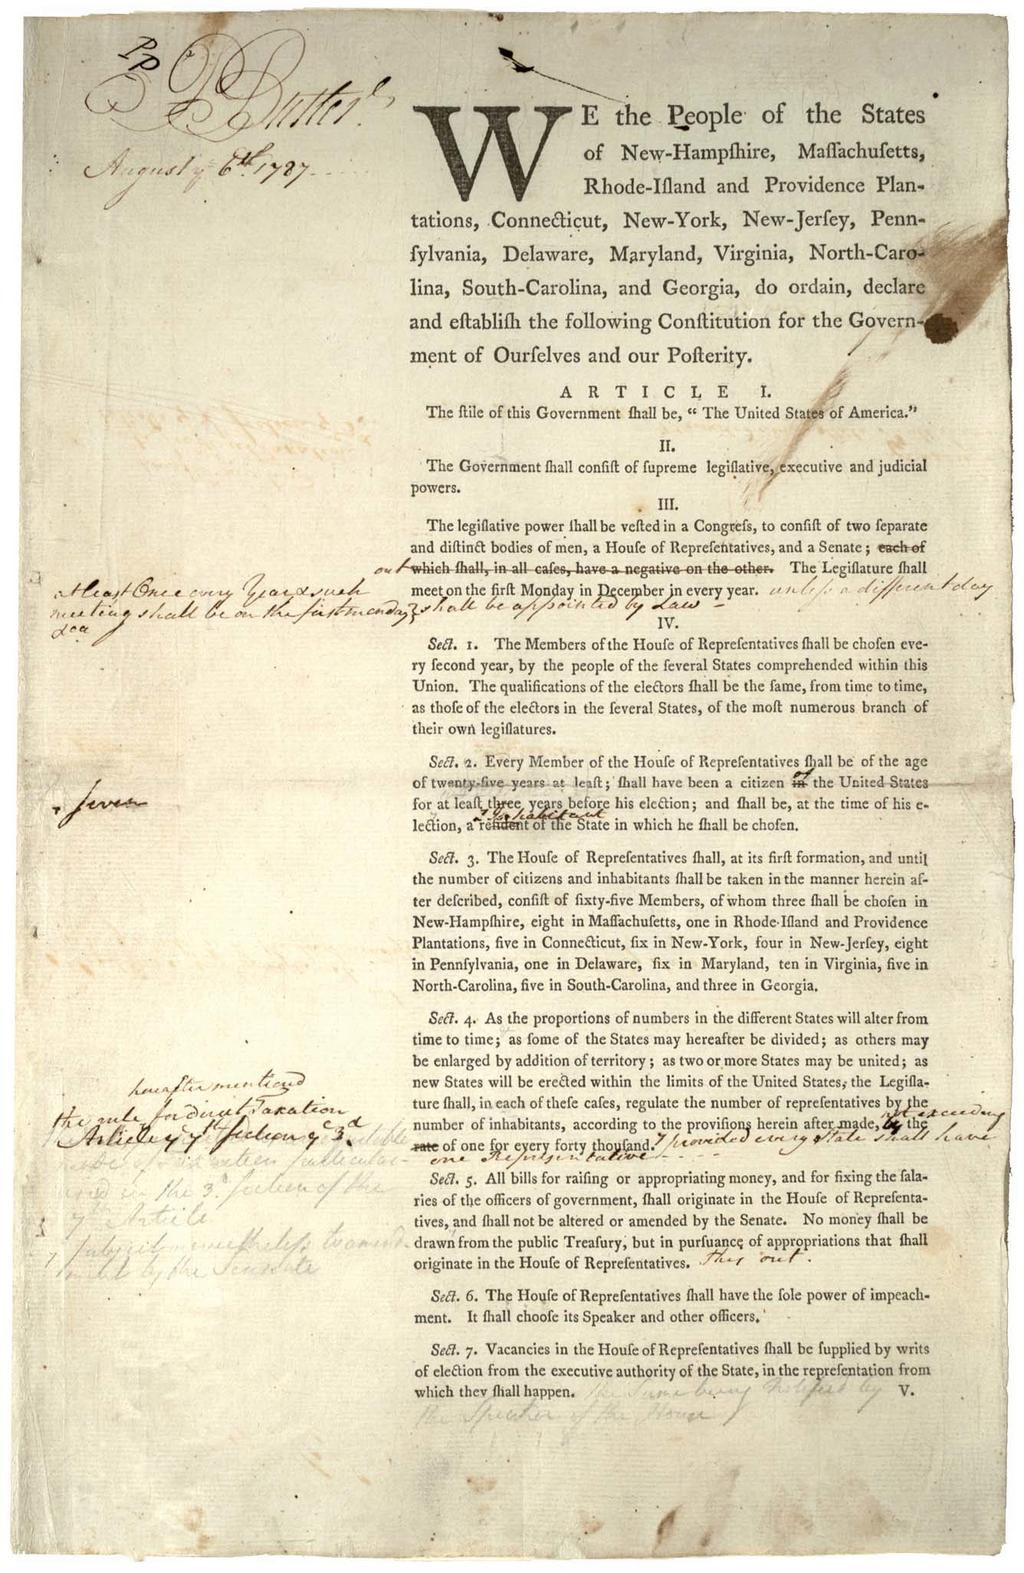 Original draft of the U.S. Constitution Preamble page 1 only http://www.